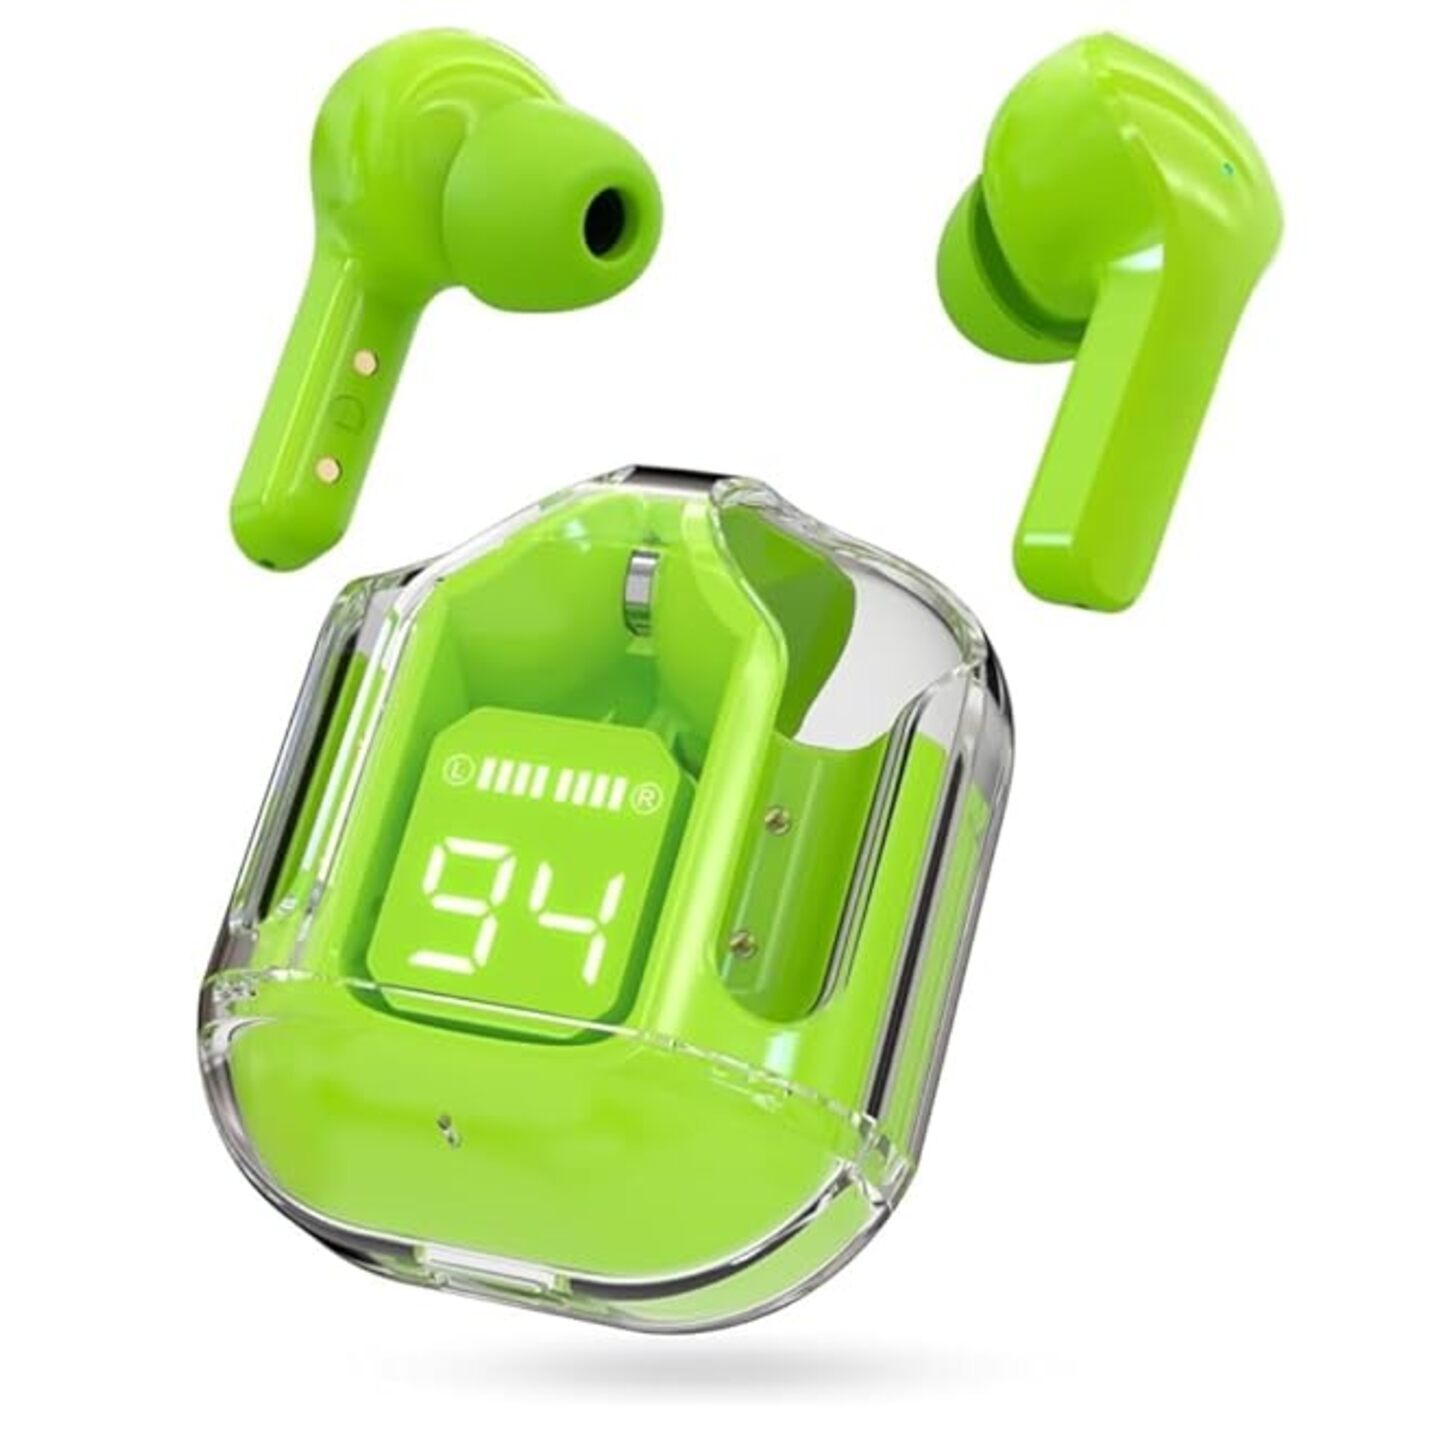 Ultrapods max TWS Bluetooth Earbuds with Charging Case, Digital Display, Microphone (Works with iPhone & Android) - Green